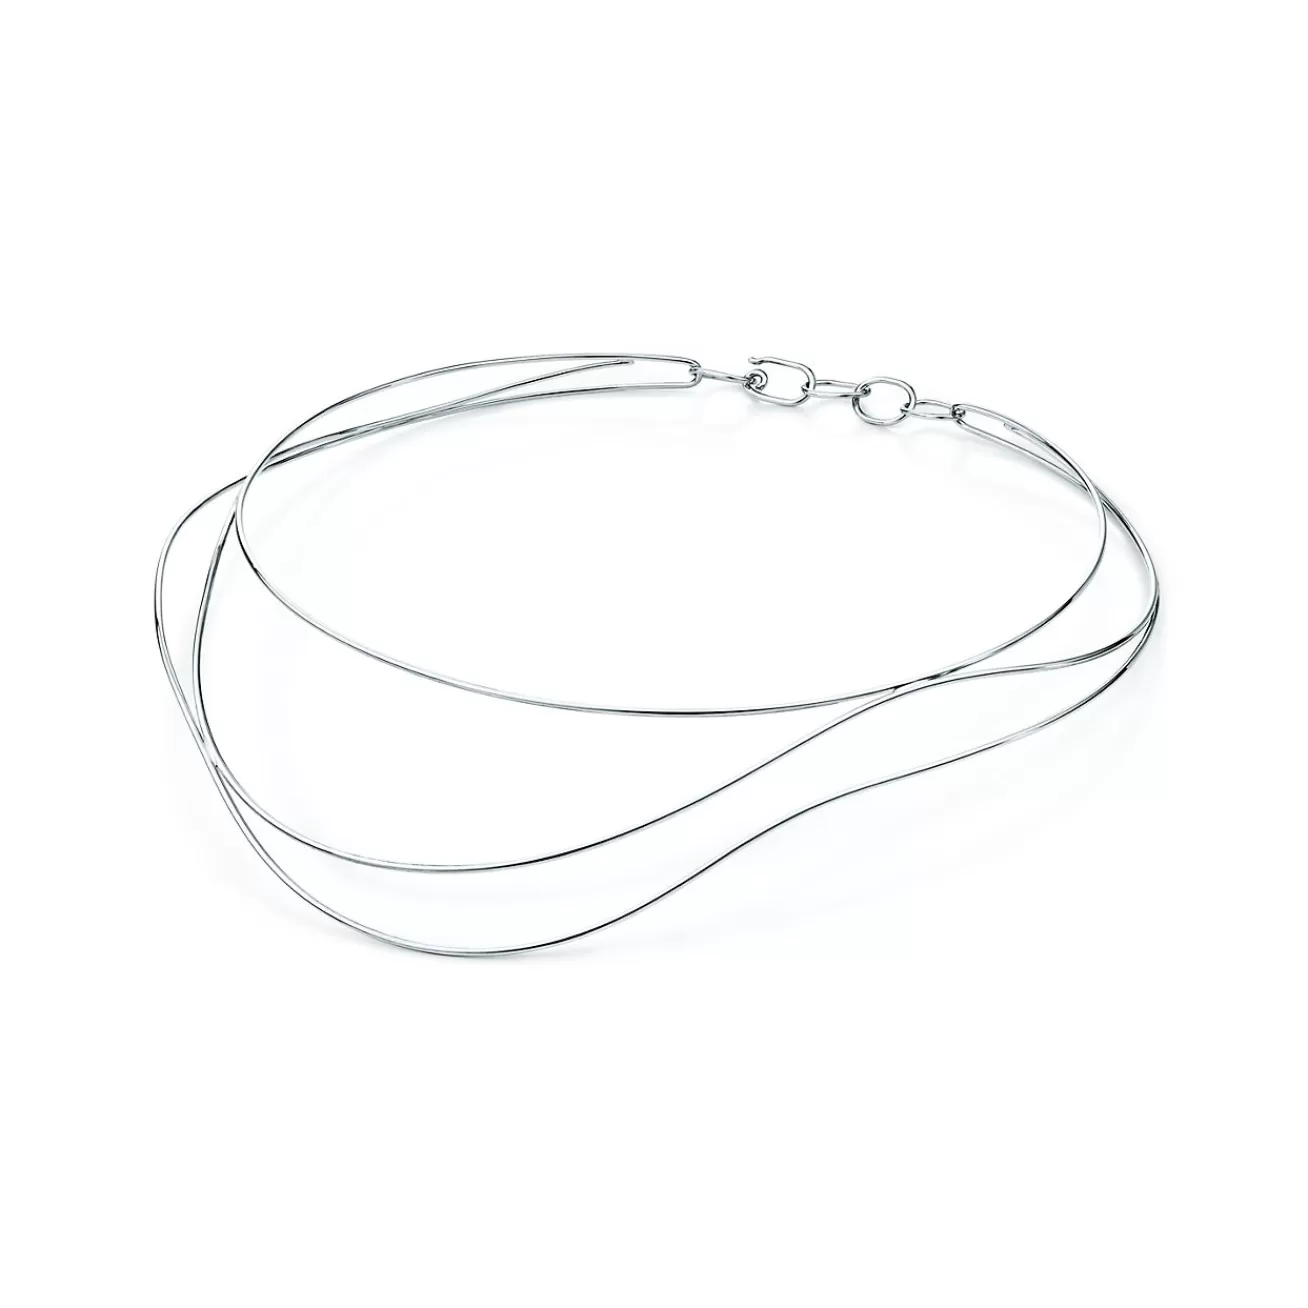 Tiffany & Co. Elsa Peretti® Wave necklace in sterling silver. | ^ Necklaces & Pendants | Bold Silver Jewelry